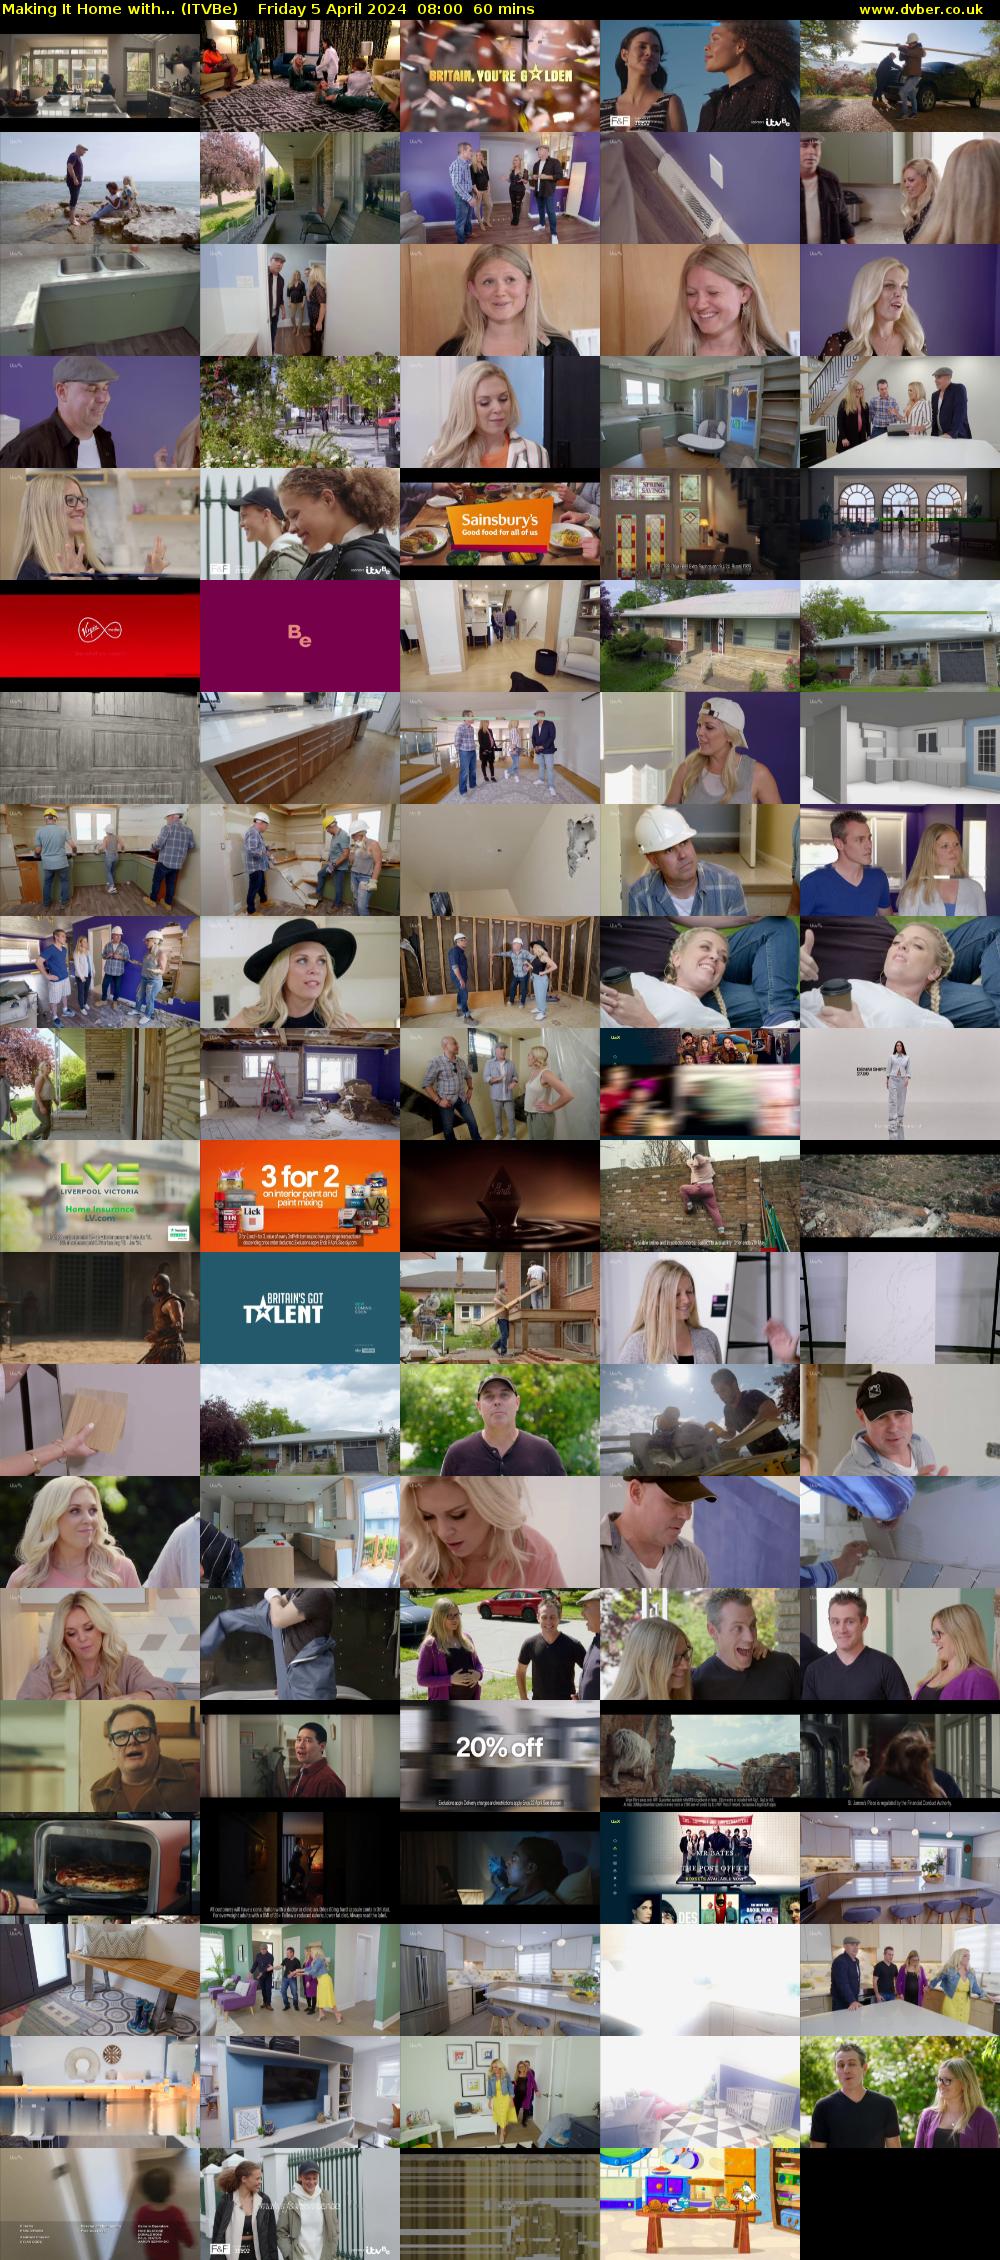 Making It Home with... (ITVBe) Friday 5 April 2024 08:00 - 09:00